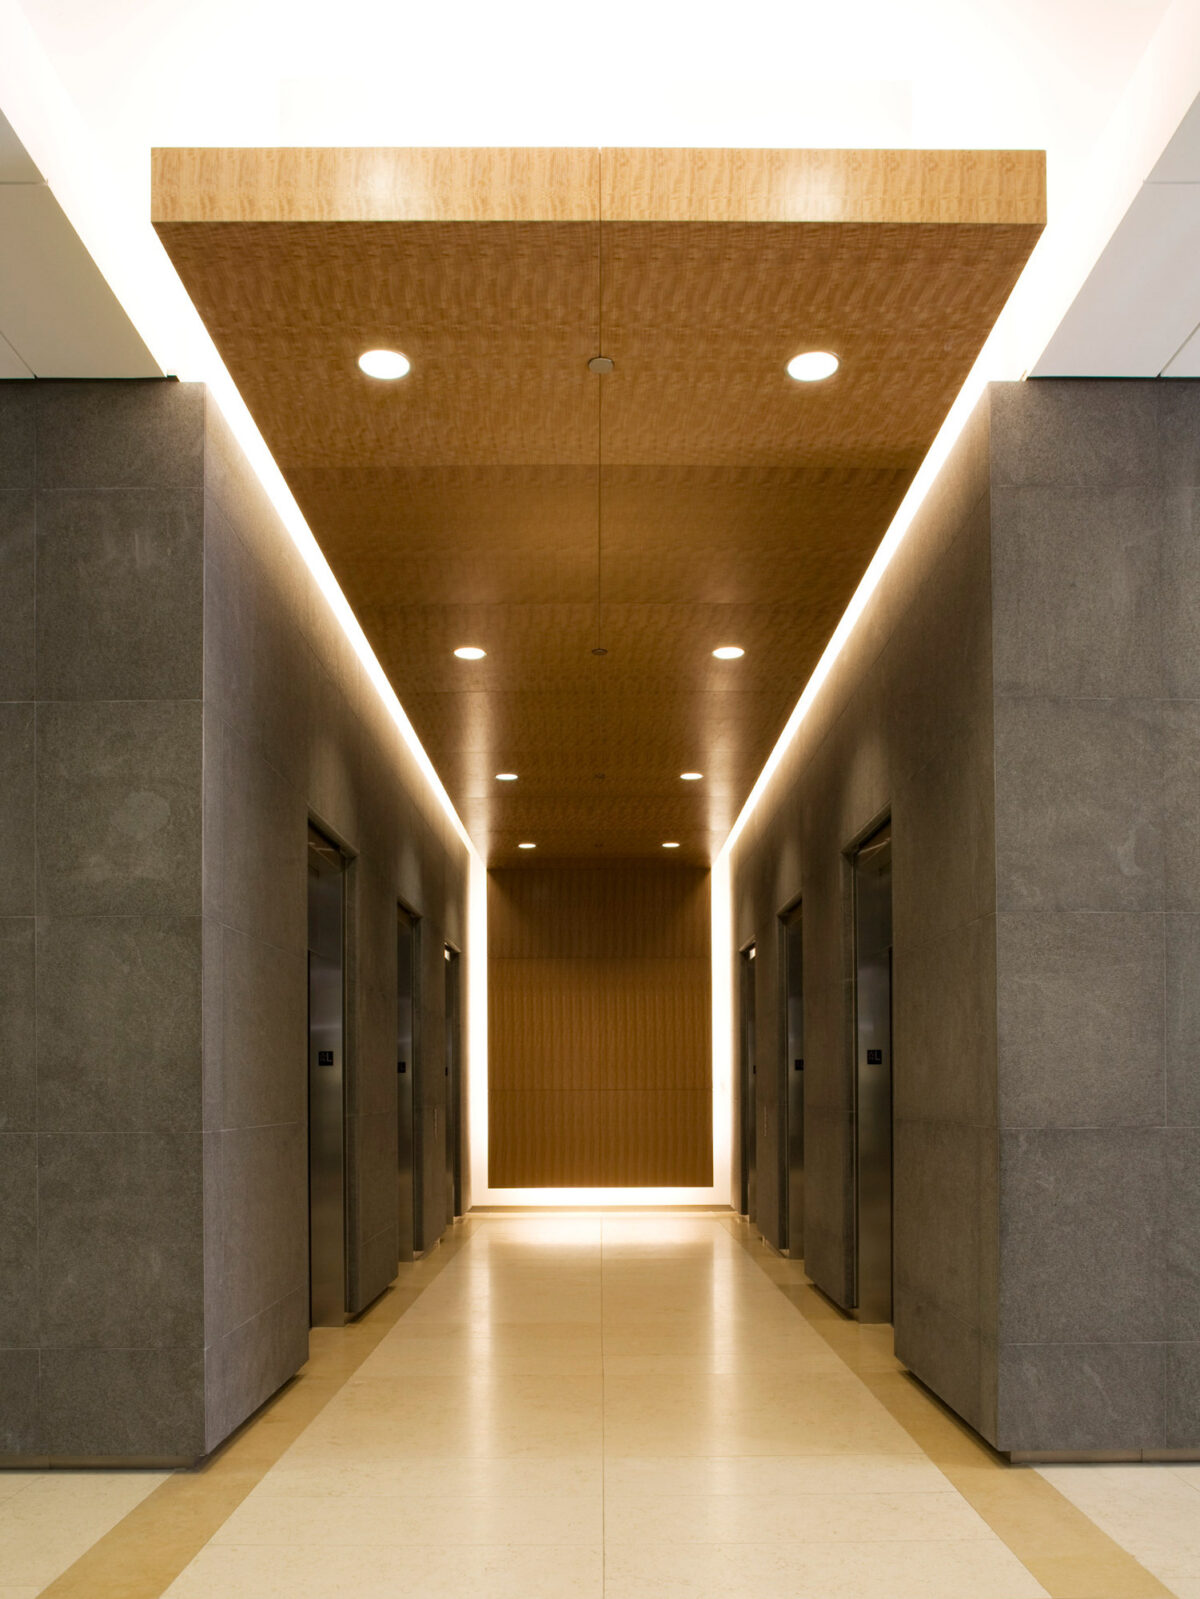 Modern hallway with recessed lighting emphasizing the straight lines and planes. Neutral tones of the walls contrast with a warm wooden ceiling and floors, highlighting minimalist aesthetic and architectural symmetry.